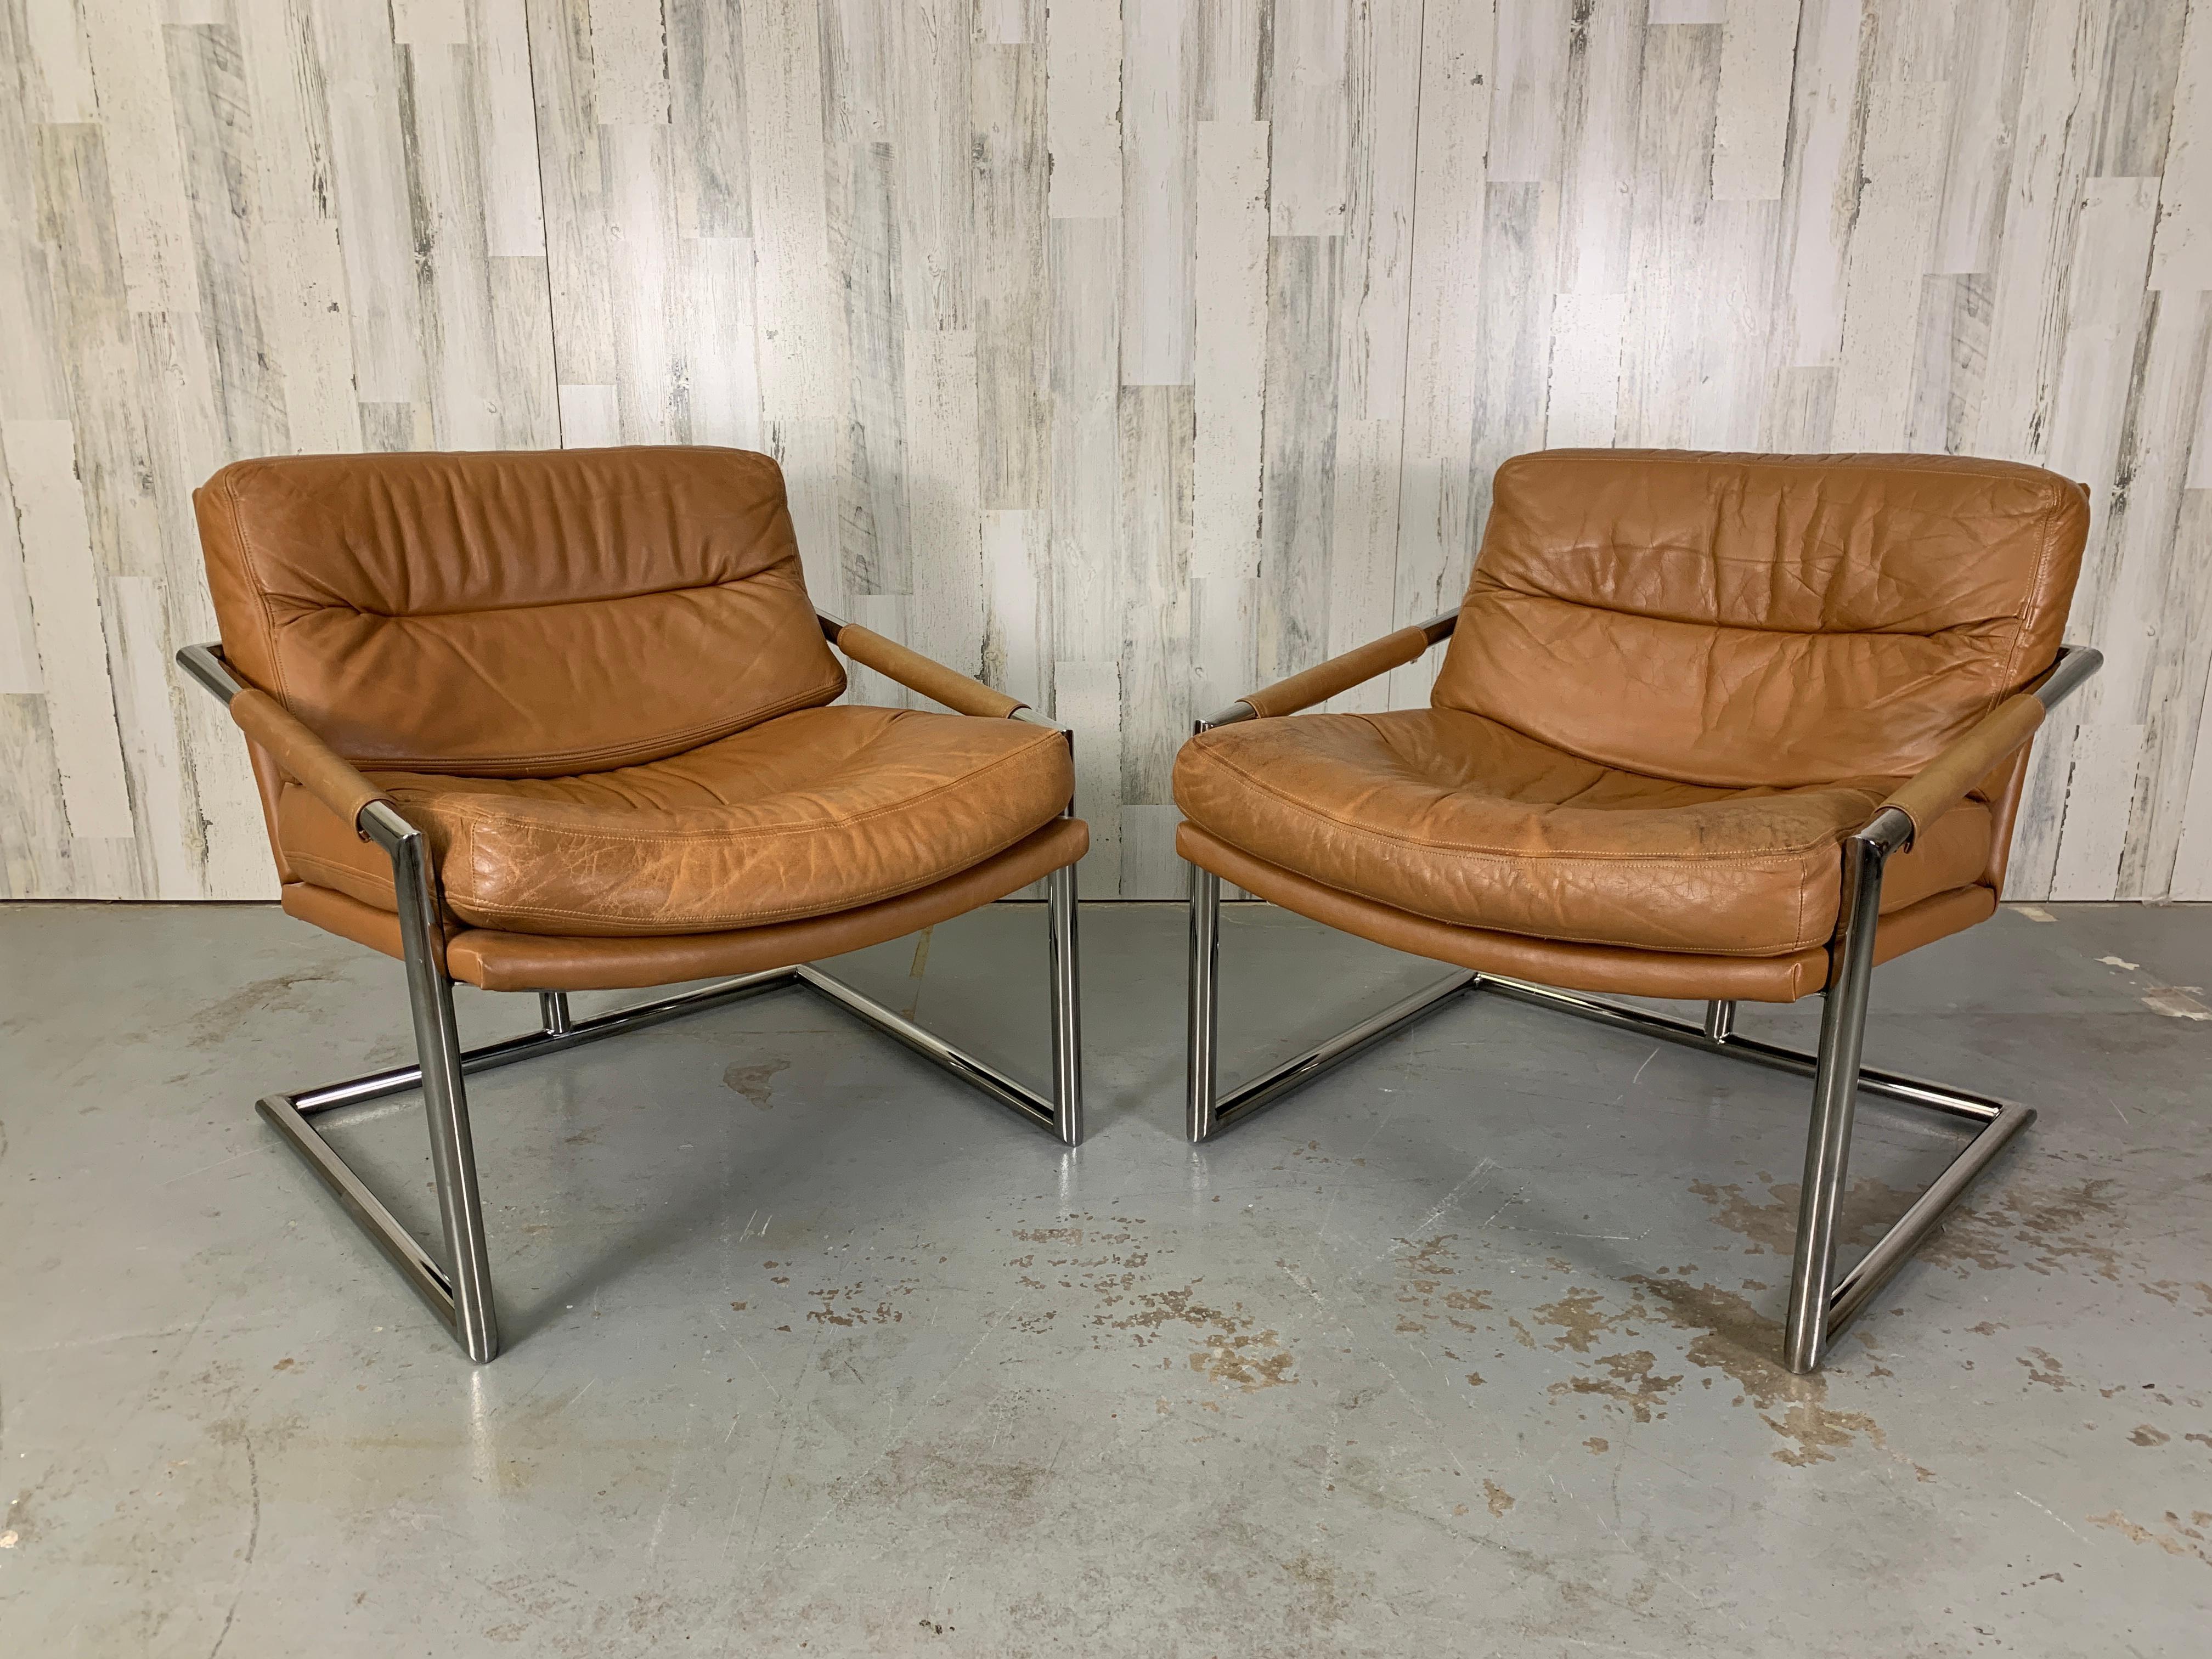 1970s Camel leather on a curved seat and back on top of a heavy chrome Tubular frame.